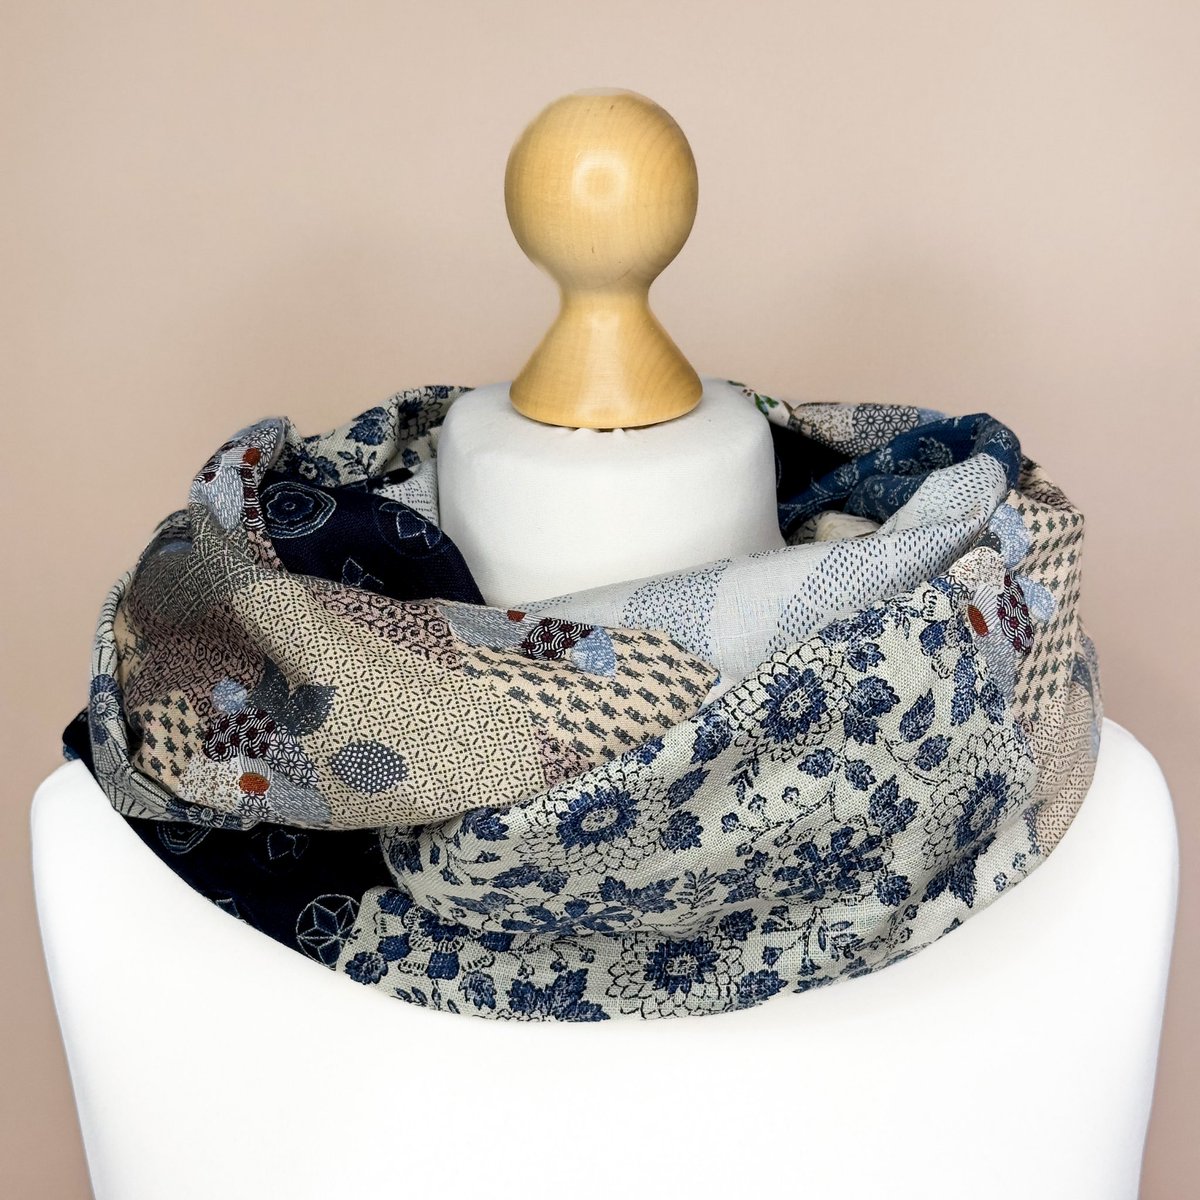 *** SALE 20% OFF *** 🧣Wrap yourself in the beauty of tradition with this Japanese Cotton Infinity Scarf. japangiftsuk.etsy.com/listing/155902… #MHHSBD #Handcrafted #JapanGifts #earlybiz #handmadehour #CraftBizParty #giftideas #UKCraftersHour #ShopSmall #UKGiftHour #UKGiftAM #inbizhour…